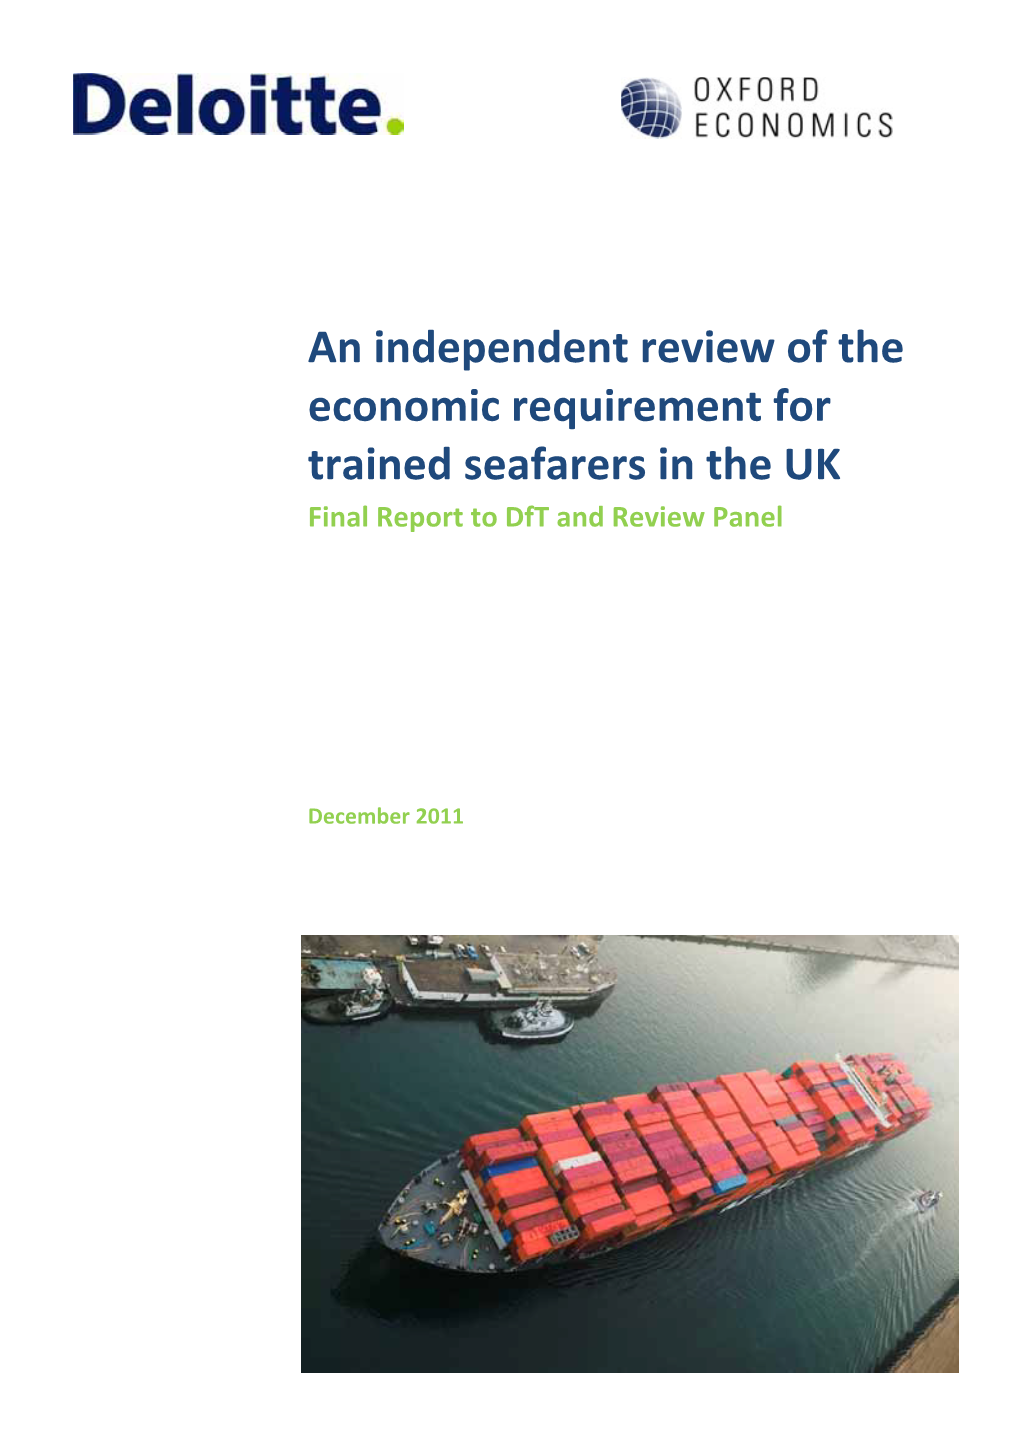 An Independent Review of the Economic Requirement for Trained Seafarers in the UK Final Report to Dft and Review Panel